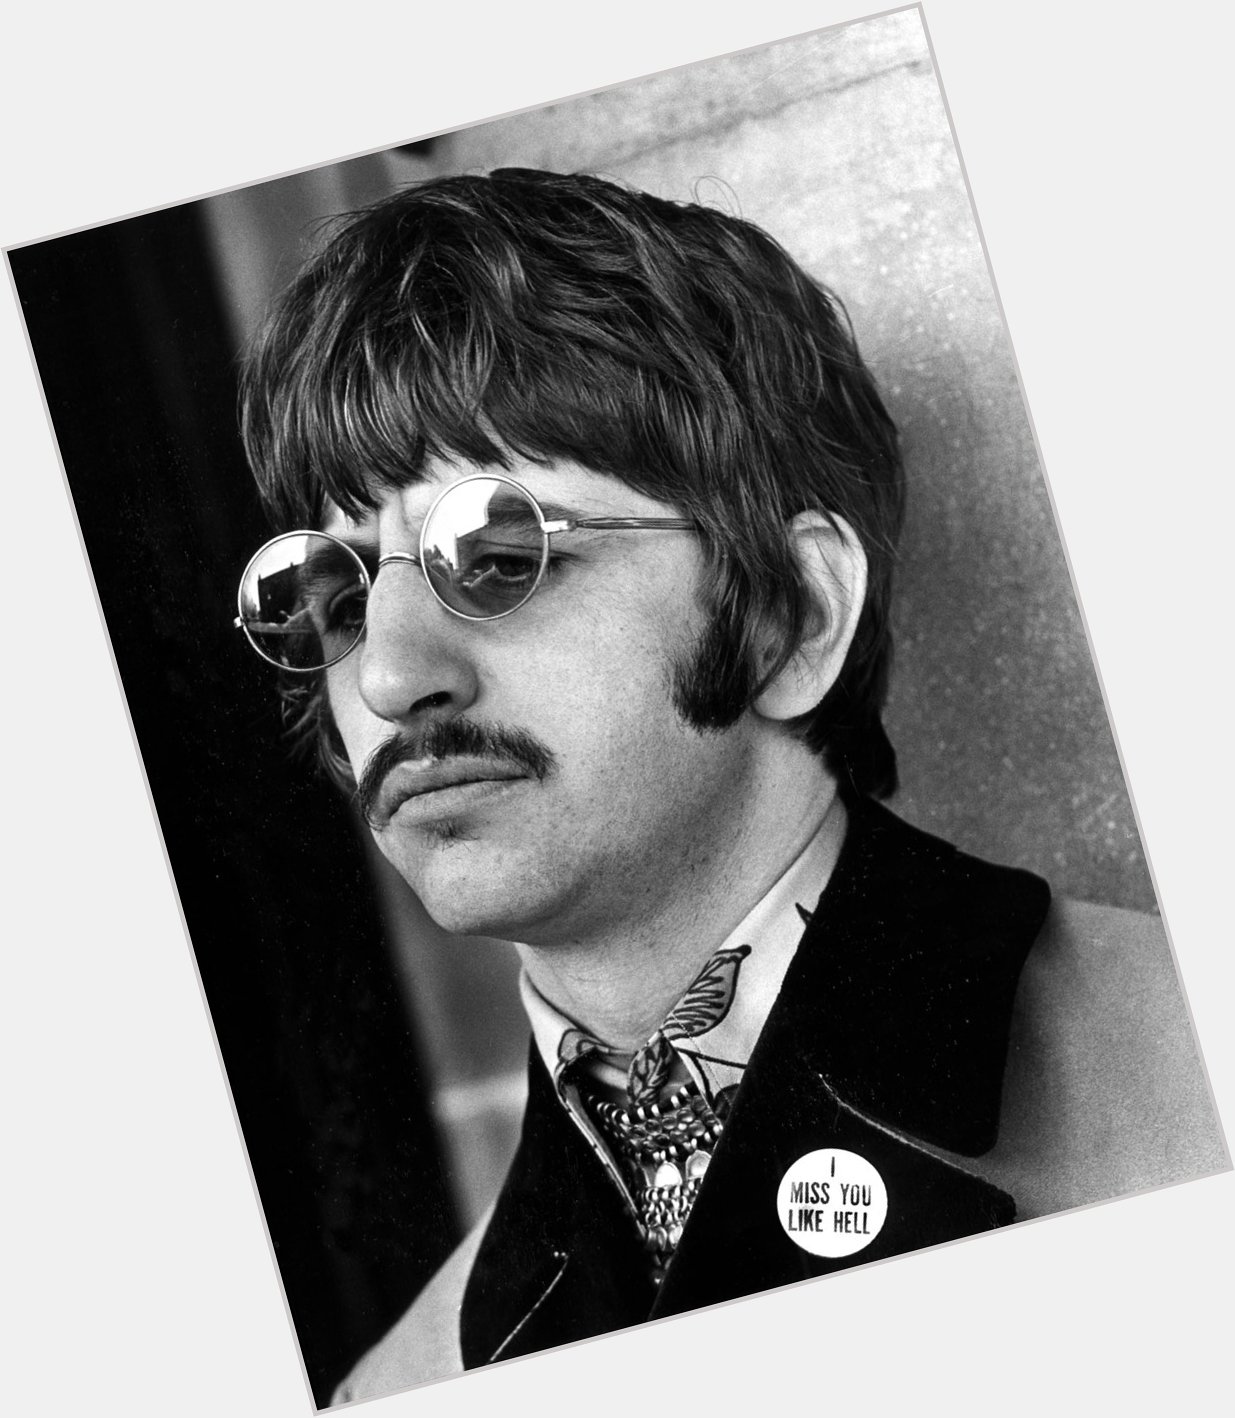 HAPPY 79TH BIRTHDAY, RINGO STARR!  What are some of your all-time favorite songs from The Beatles? 